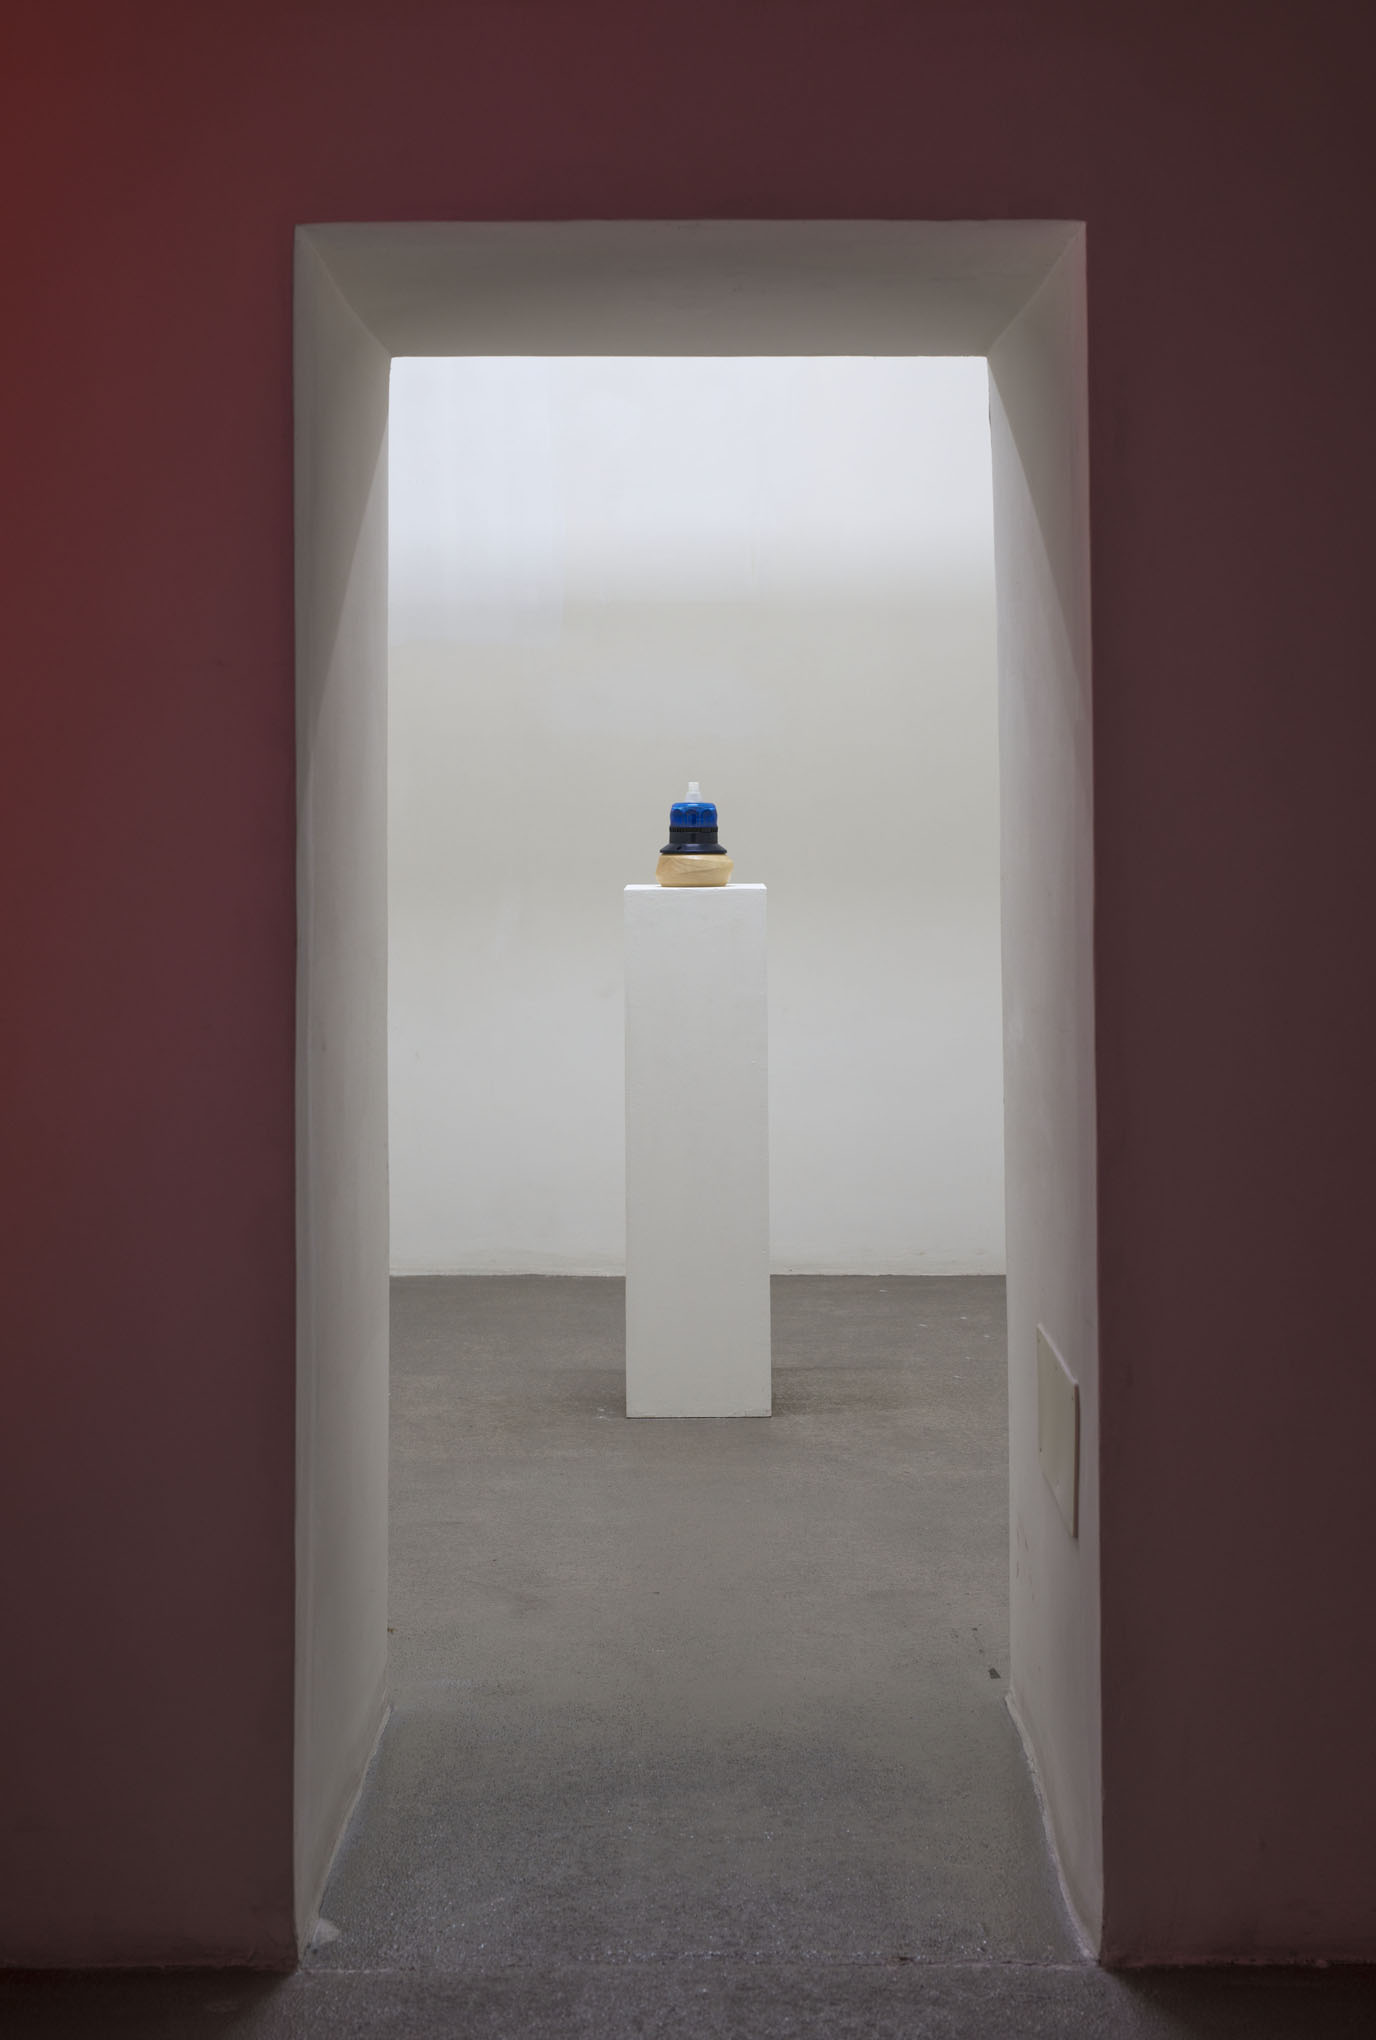 Wolfgang Breuer, Fiction is a Terrible Enemy. Installation view at Fondazione Giuliani, photo by Giorgio Benni